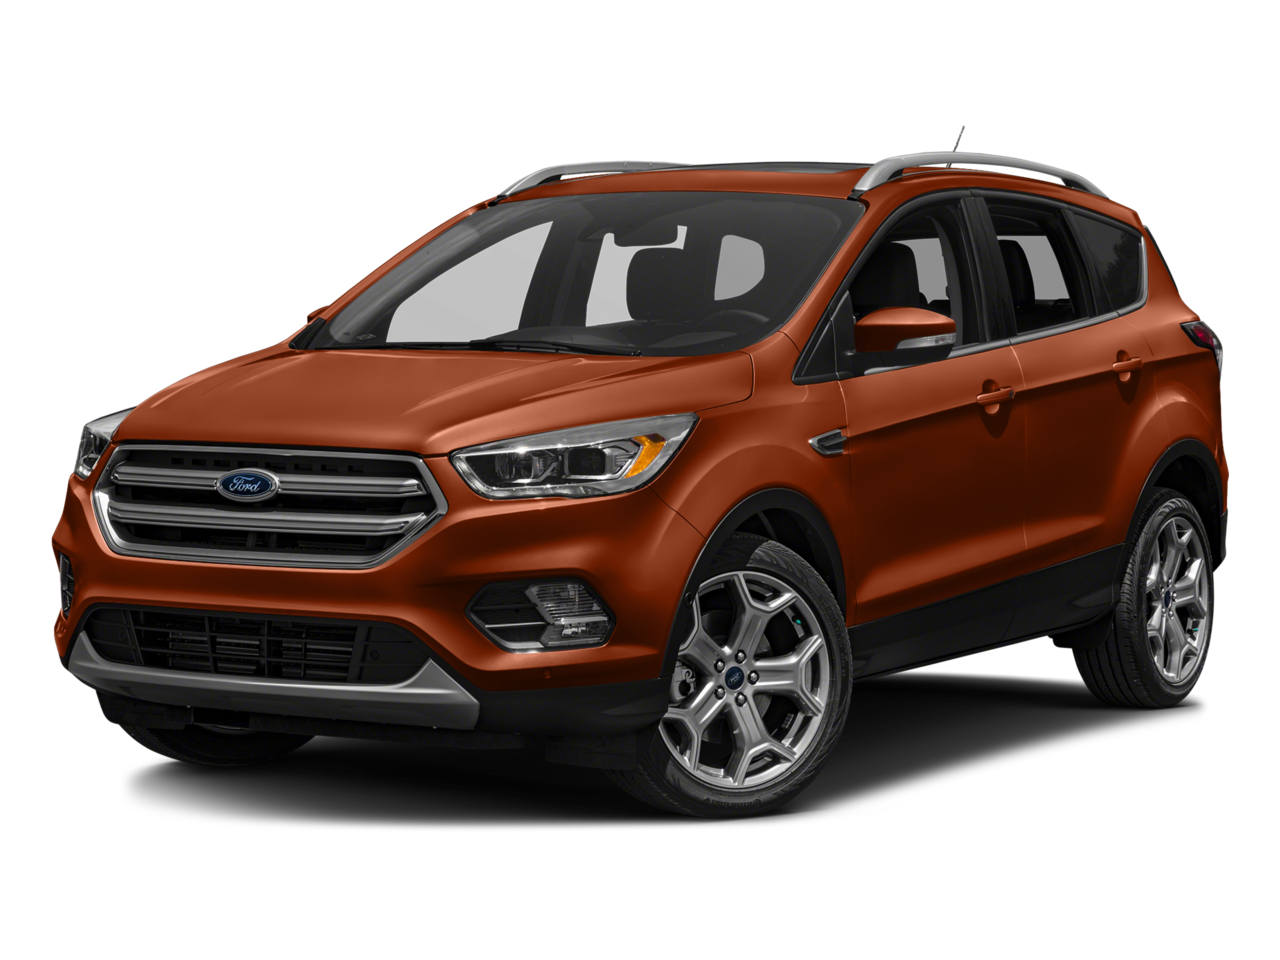 2017 Ford Escape Interior Lights Won T Turn Off